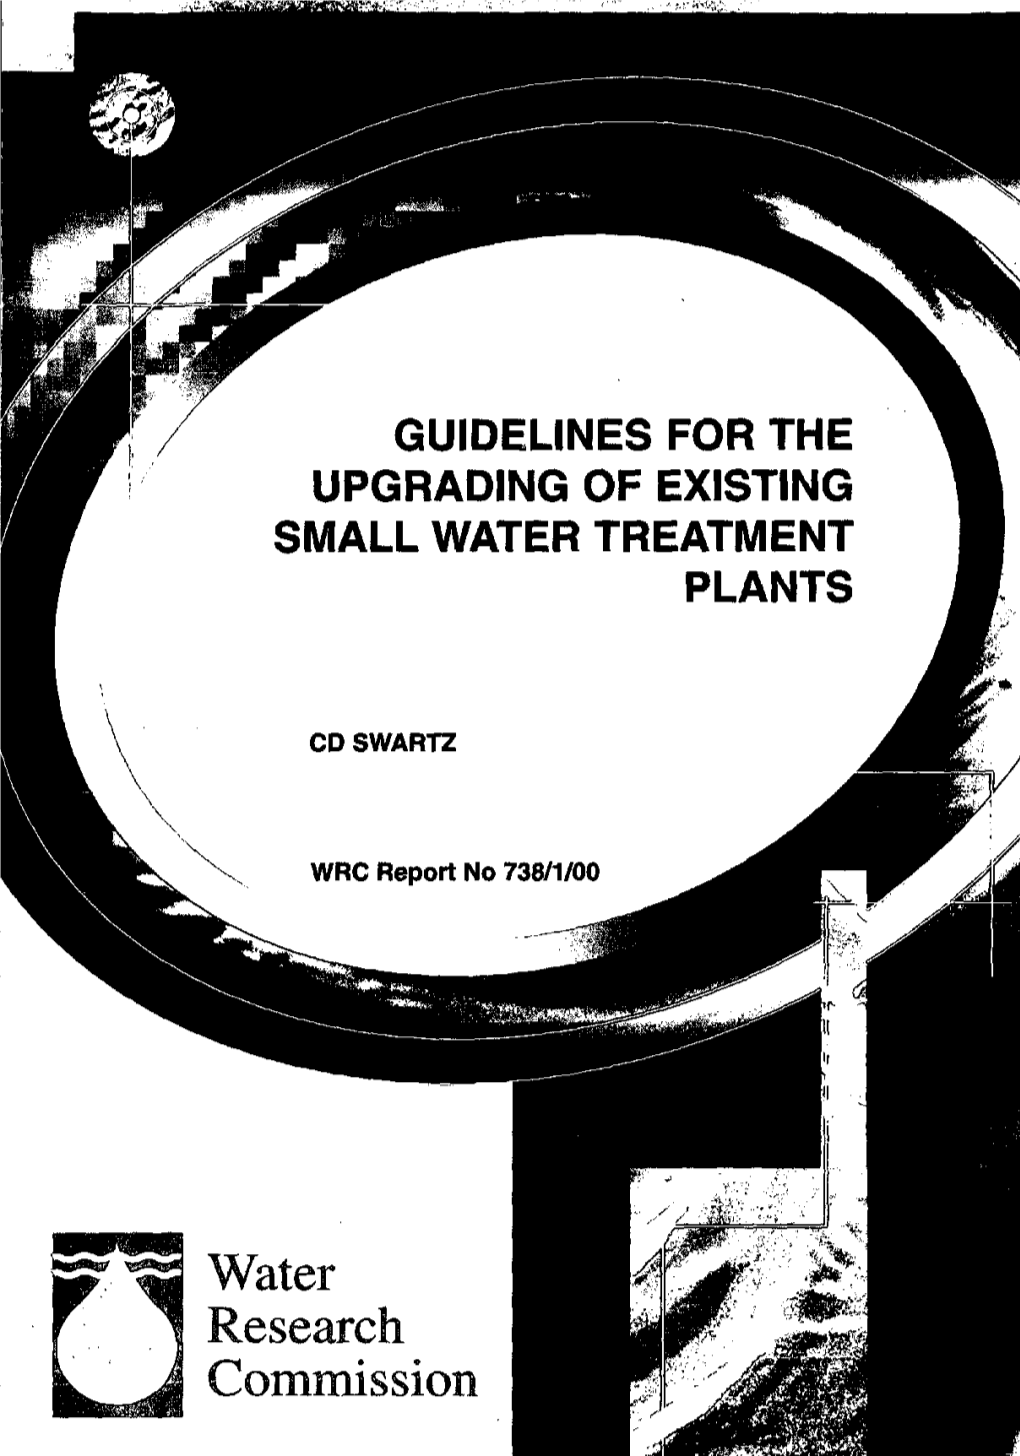 Guidelines for the Upgrading of Existing Small Water Treatment Plants